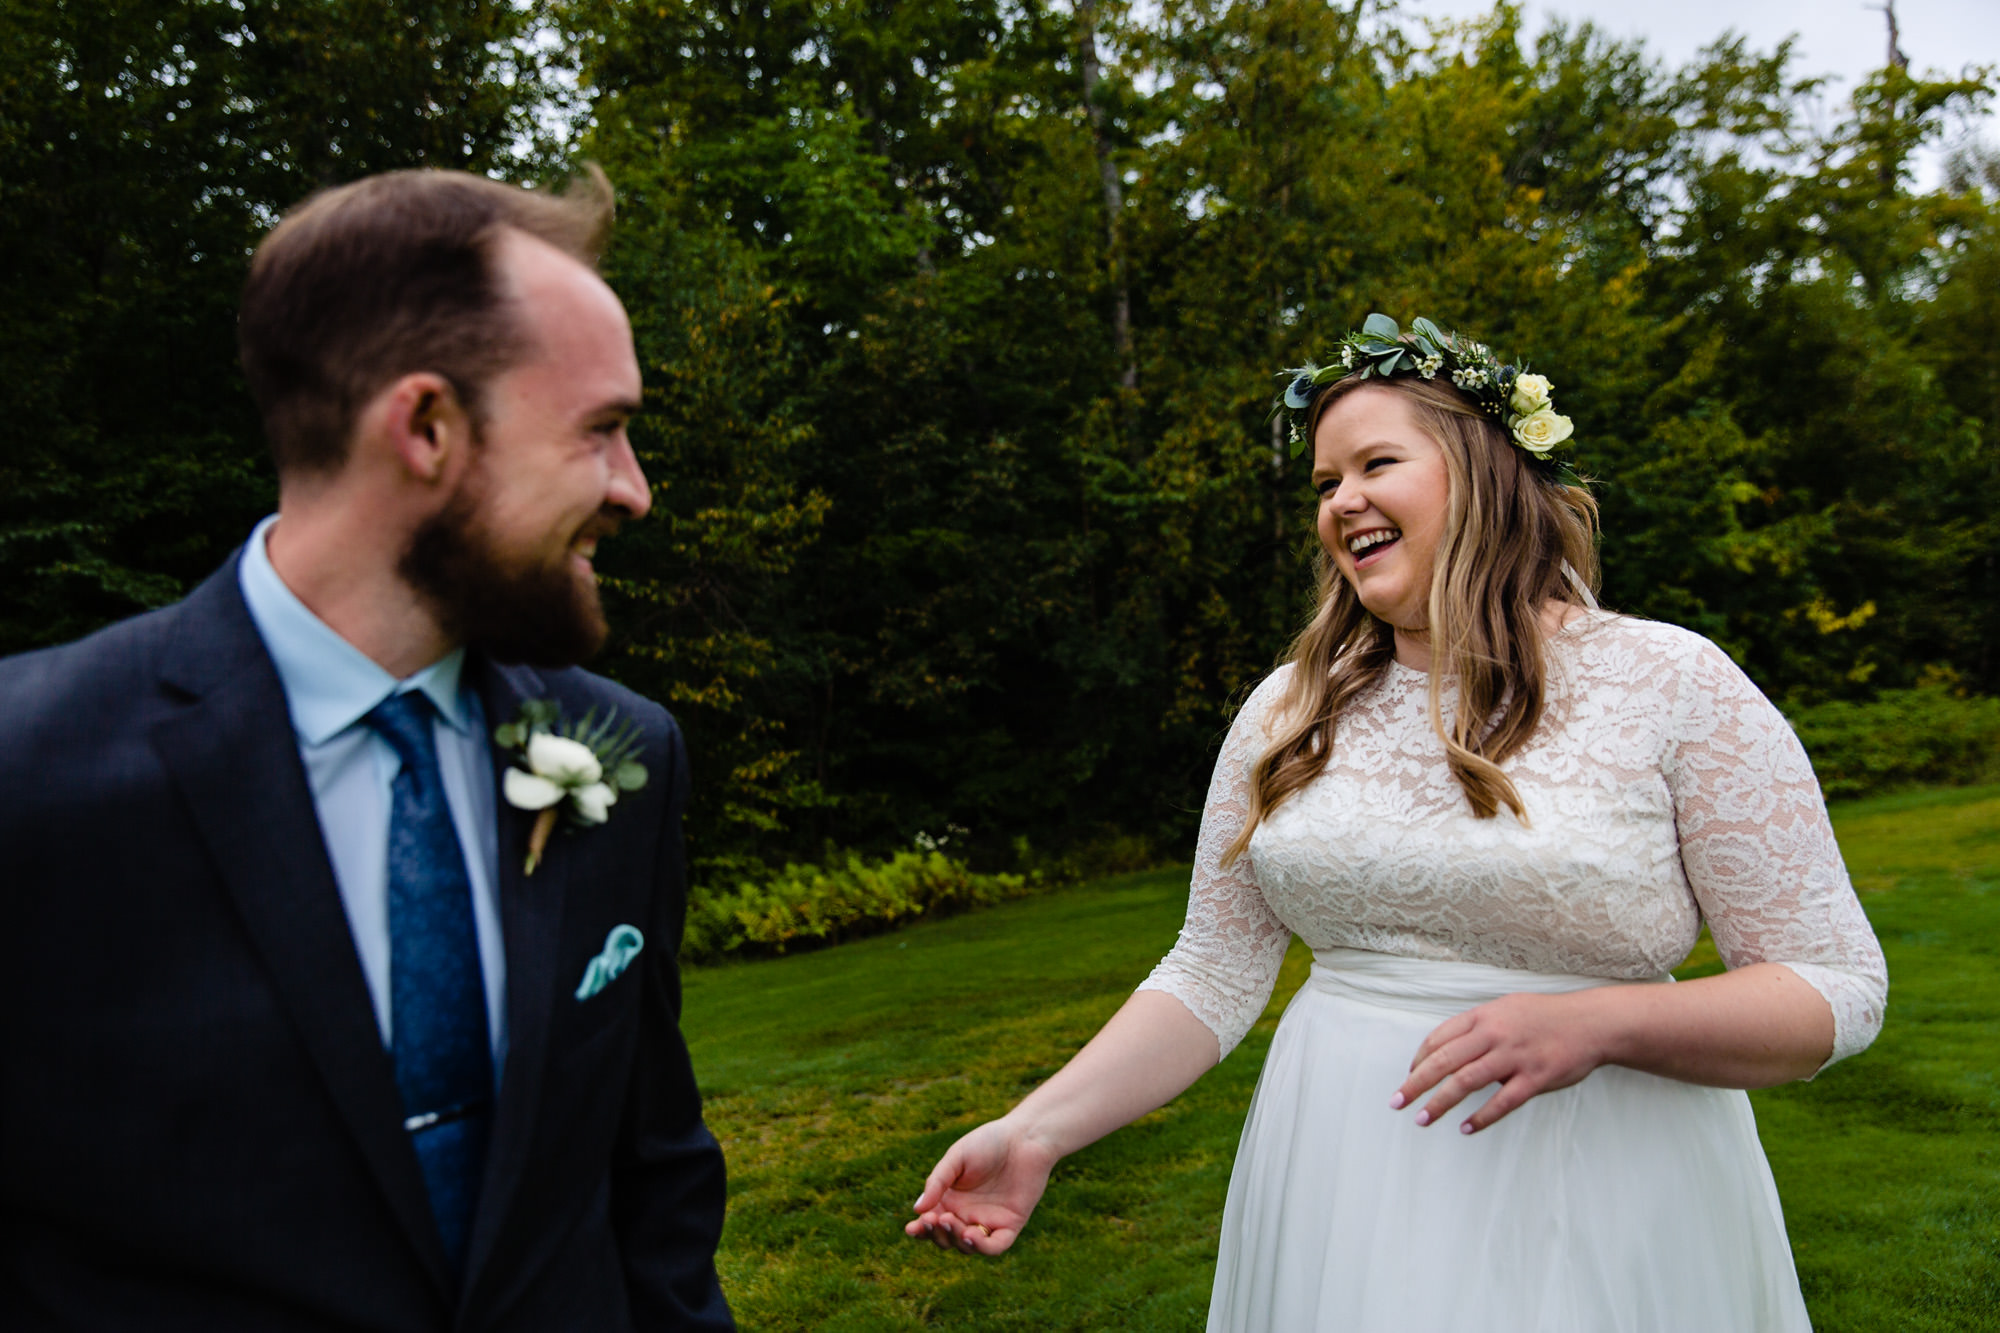 The bride and groom share a first look at their wedding at Sugarloaf Mountain in Maine